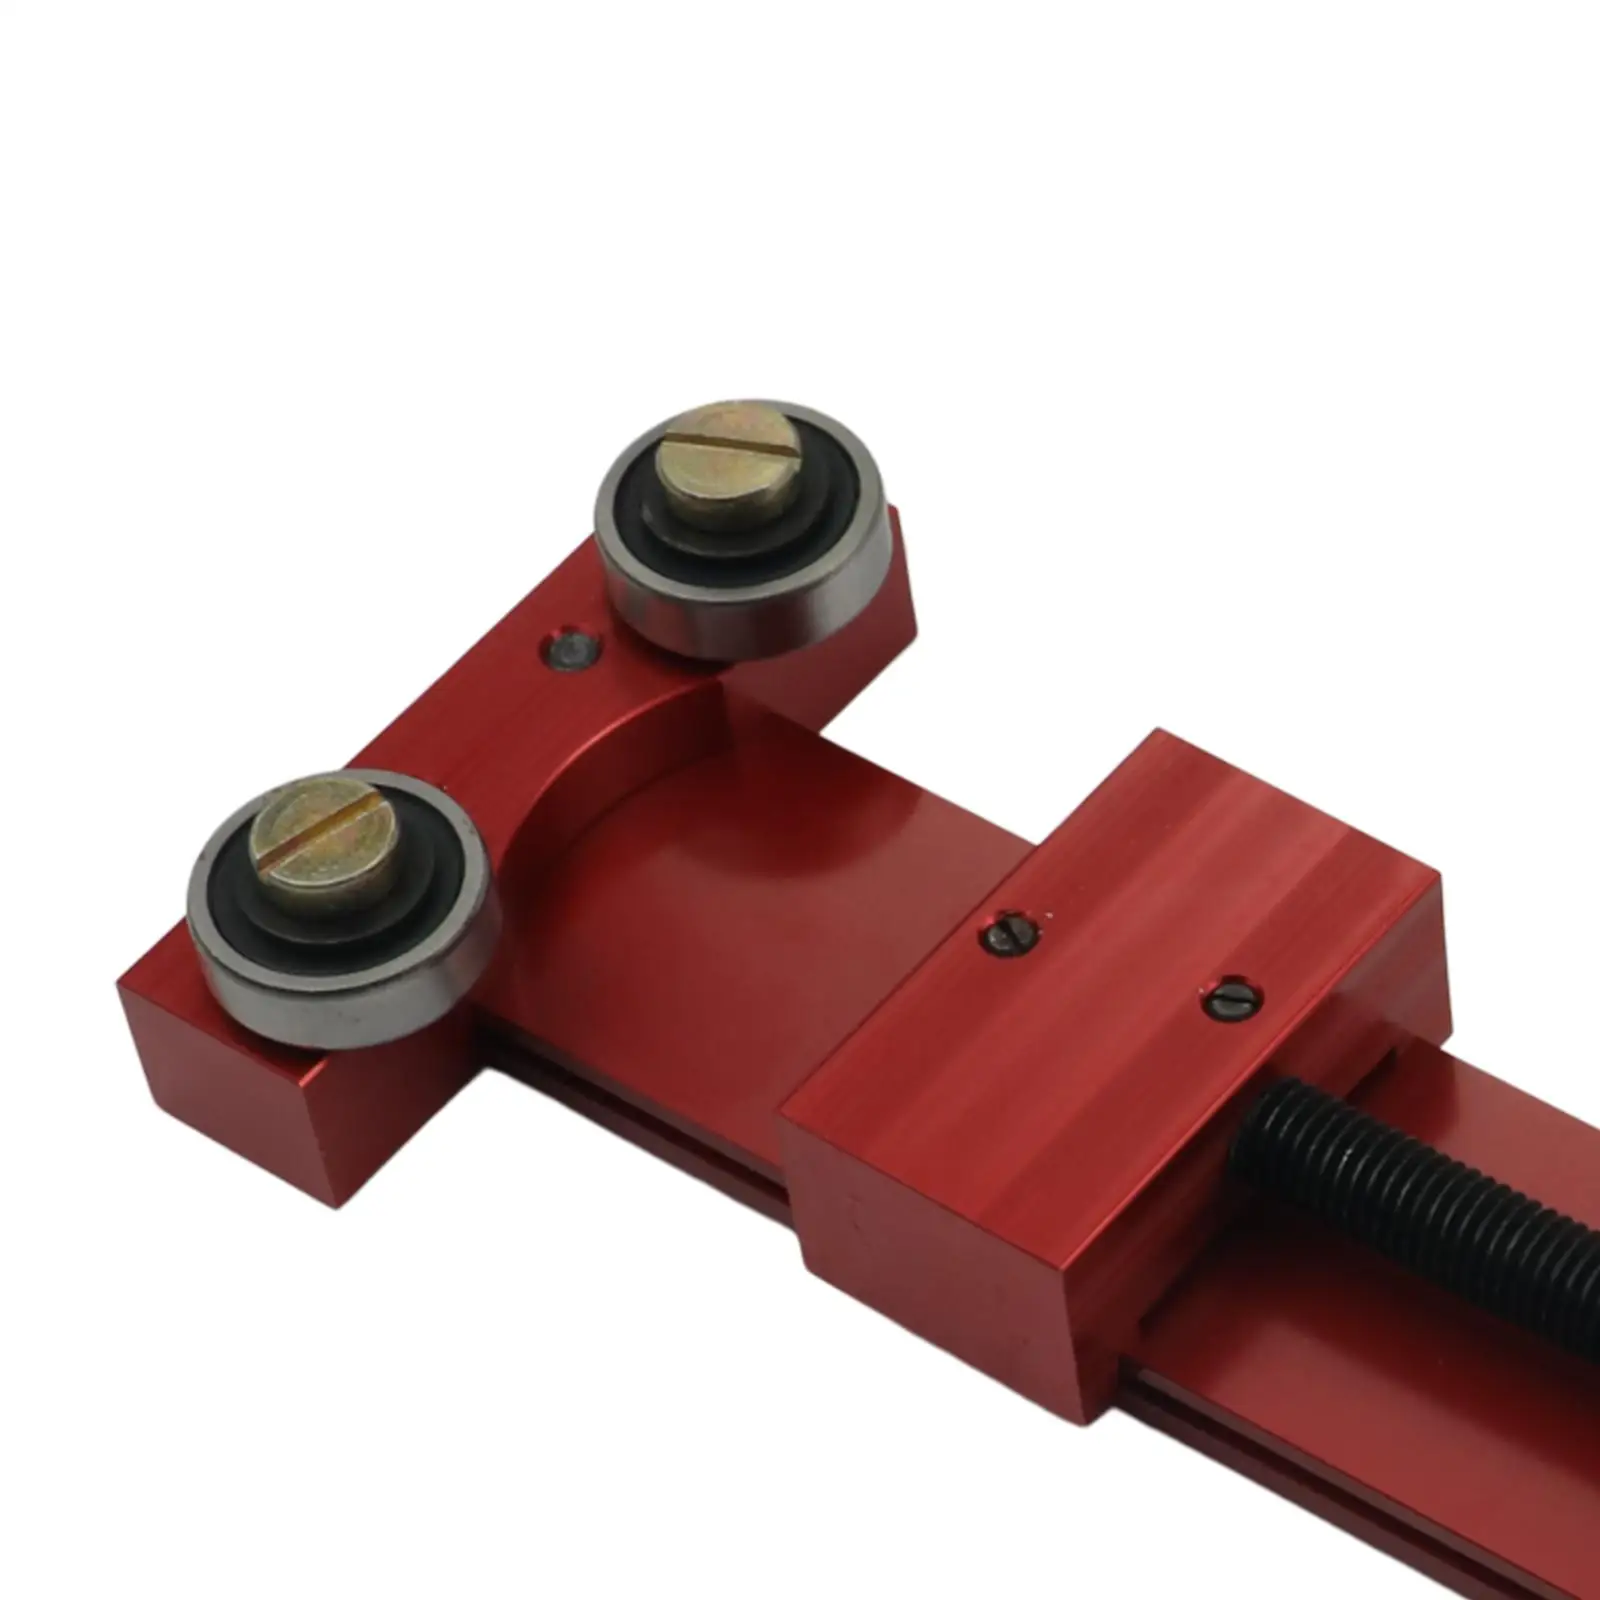 Oil Filter Cutter 66490 Red Stable Professional Fittings Accessory Automotive